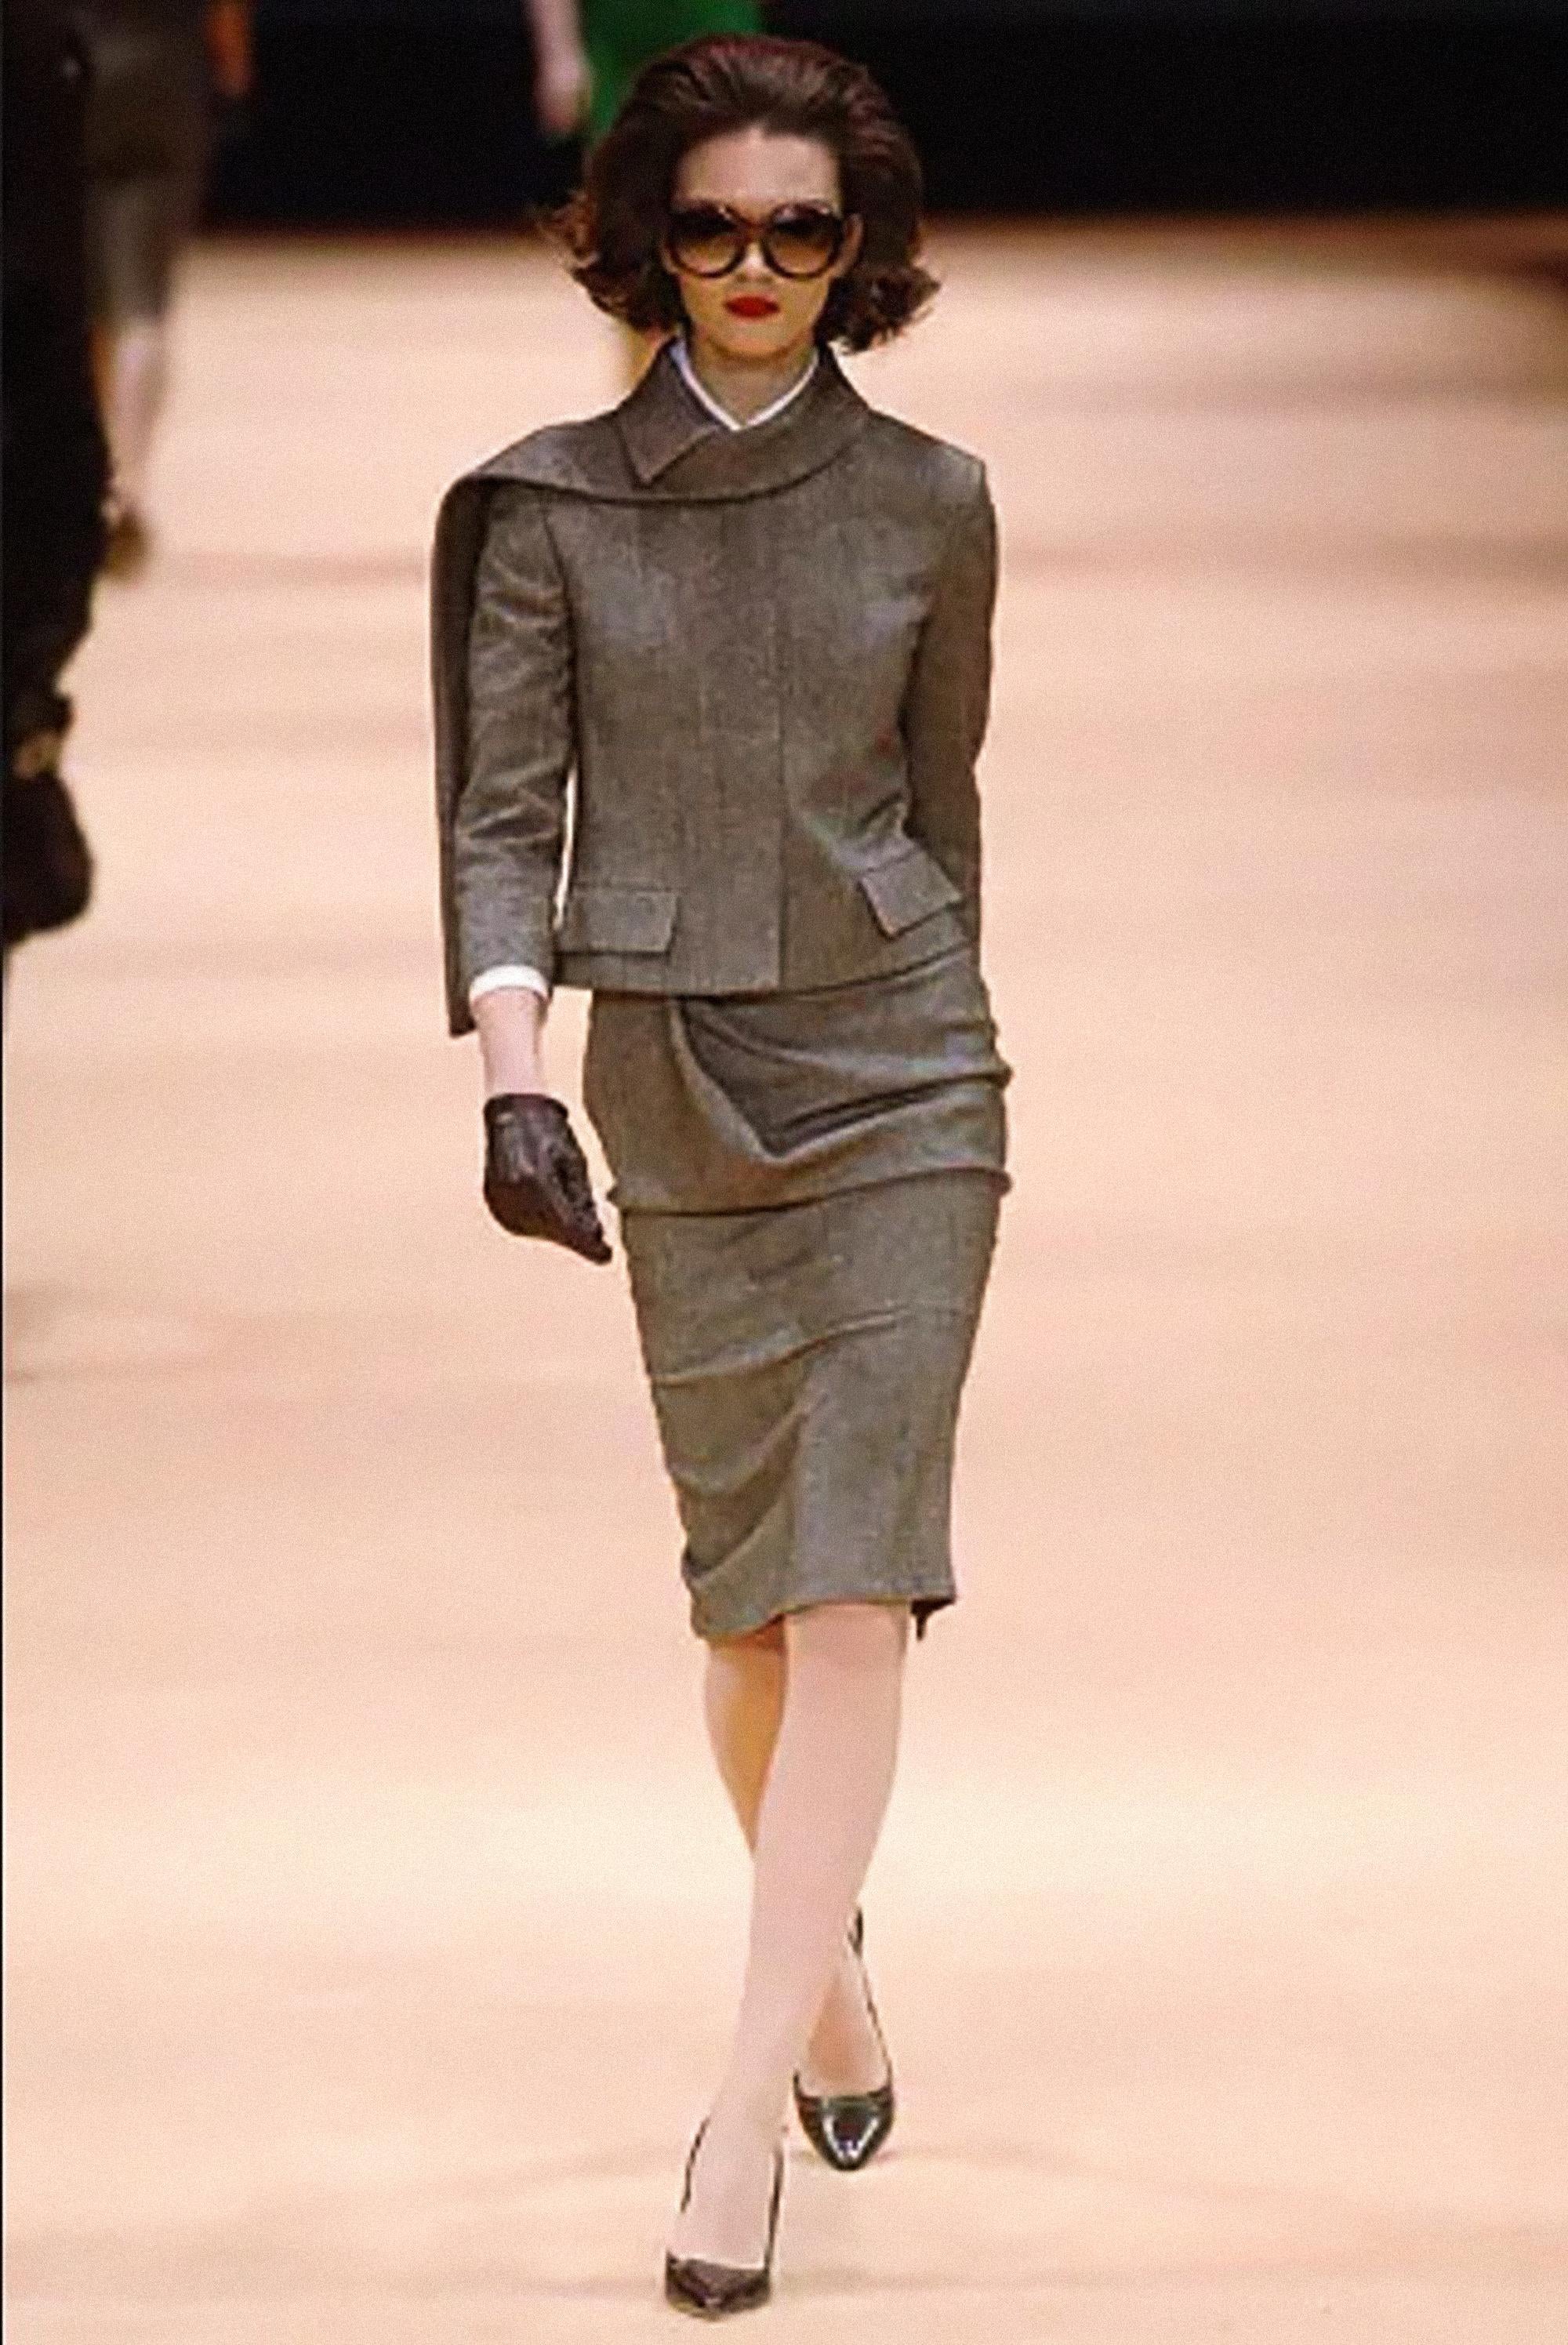 Alexander McQueen Archival FW 2005 'The Man Who Knew Too Much' Wool Skirt Suit For Sale 1